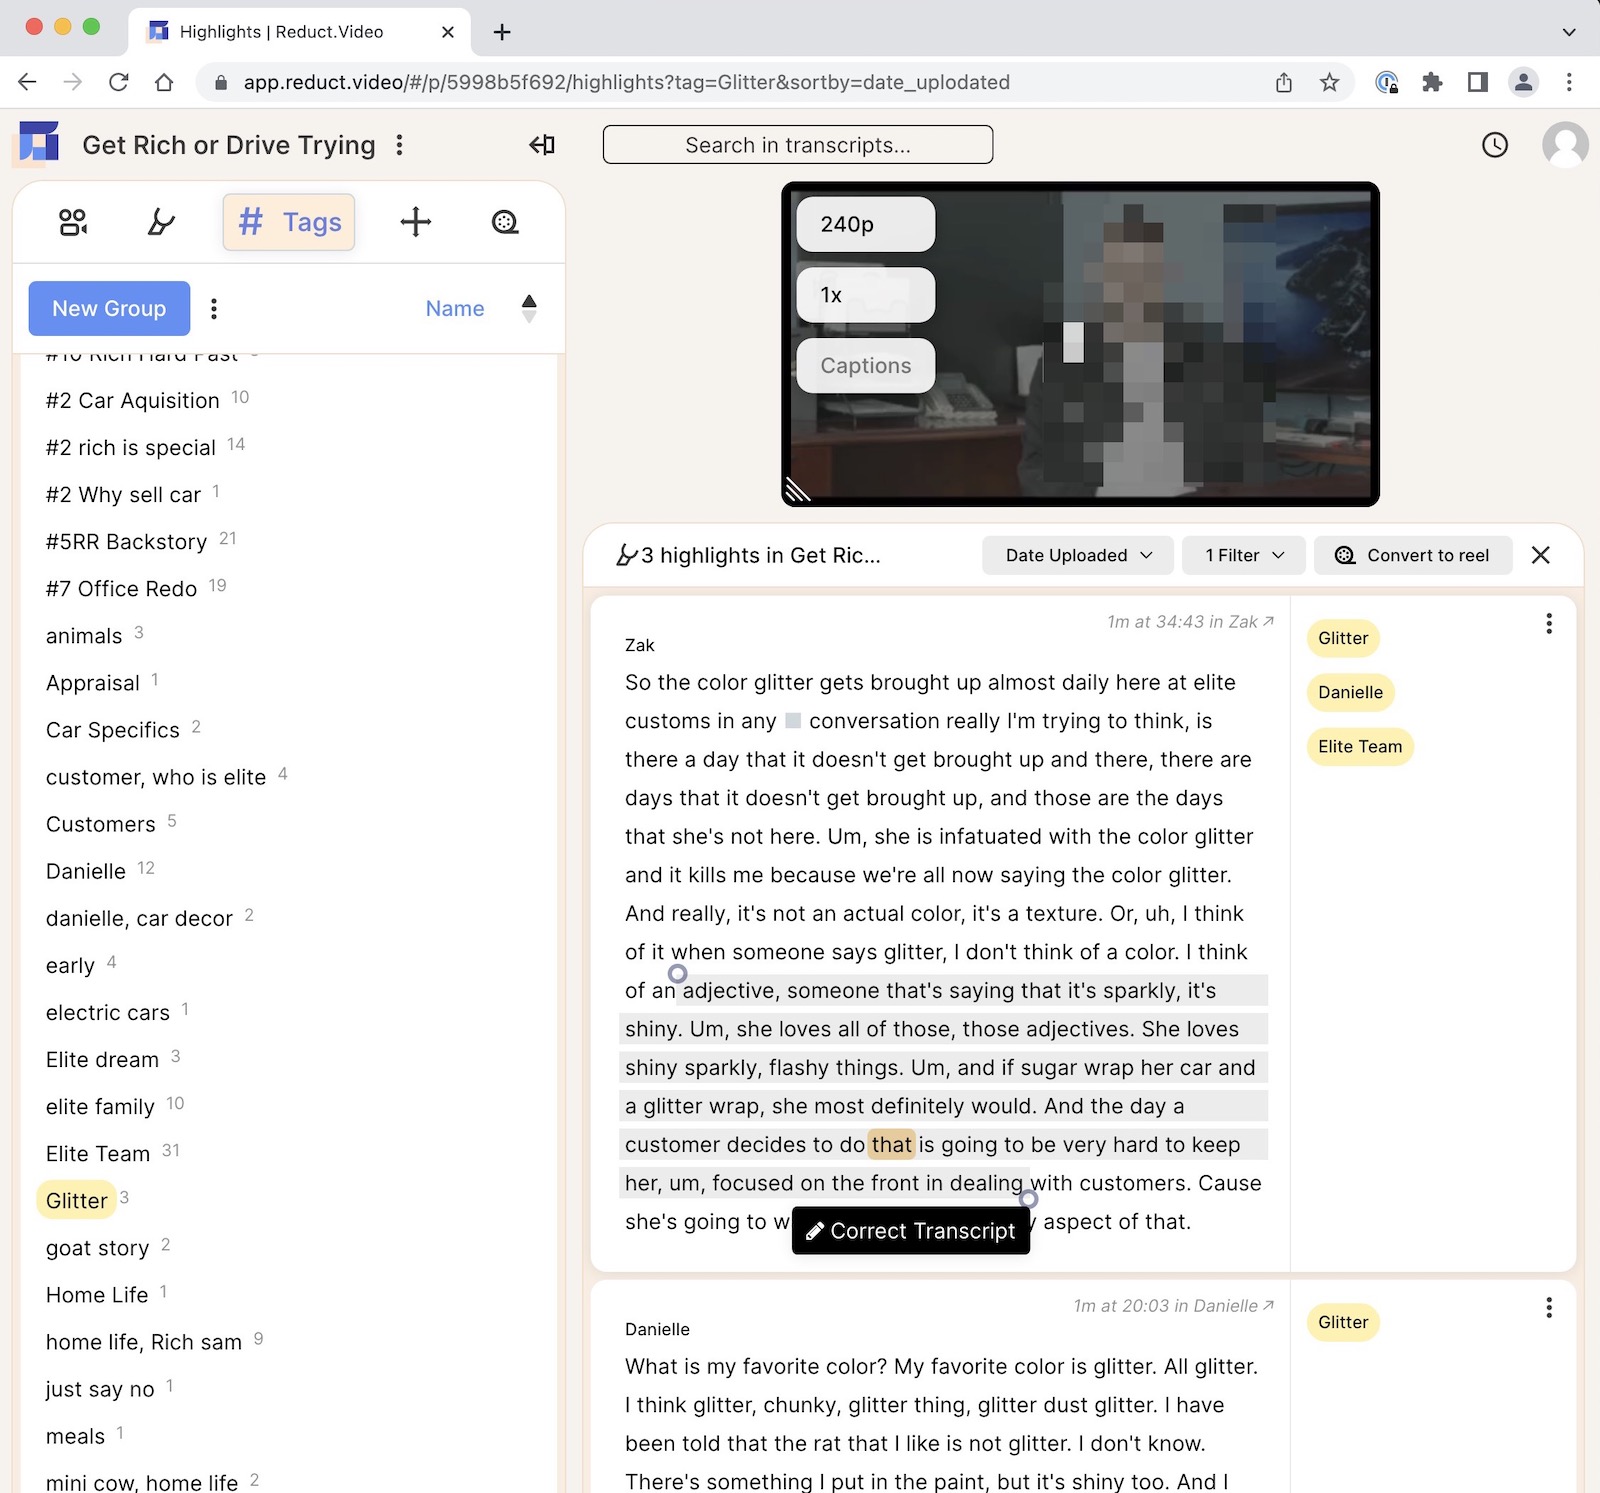 Review: Reduct.video - A cloud and AI-based system to transcribe, organize, correct and edit video from transcripts 30